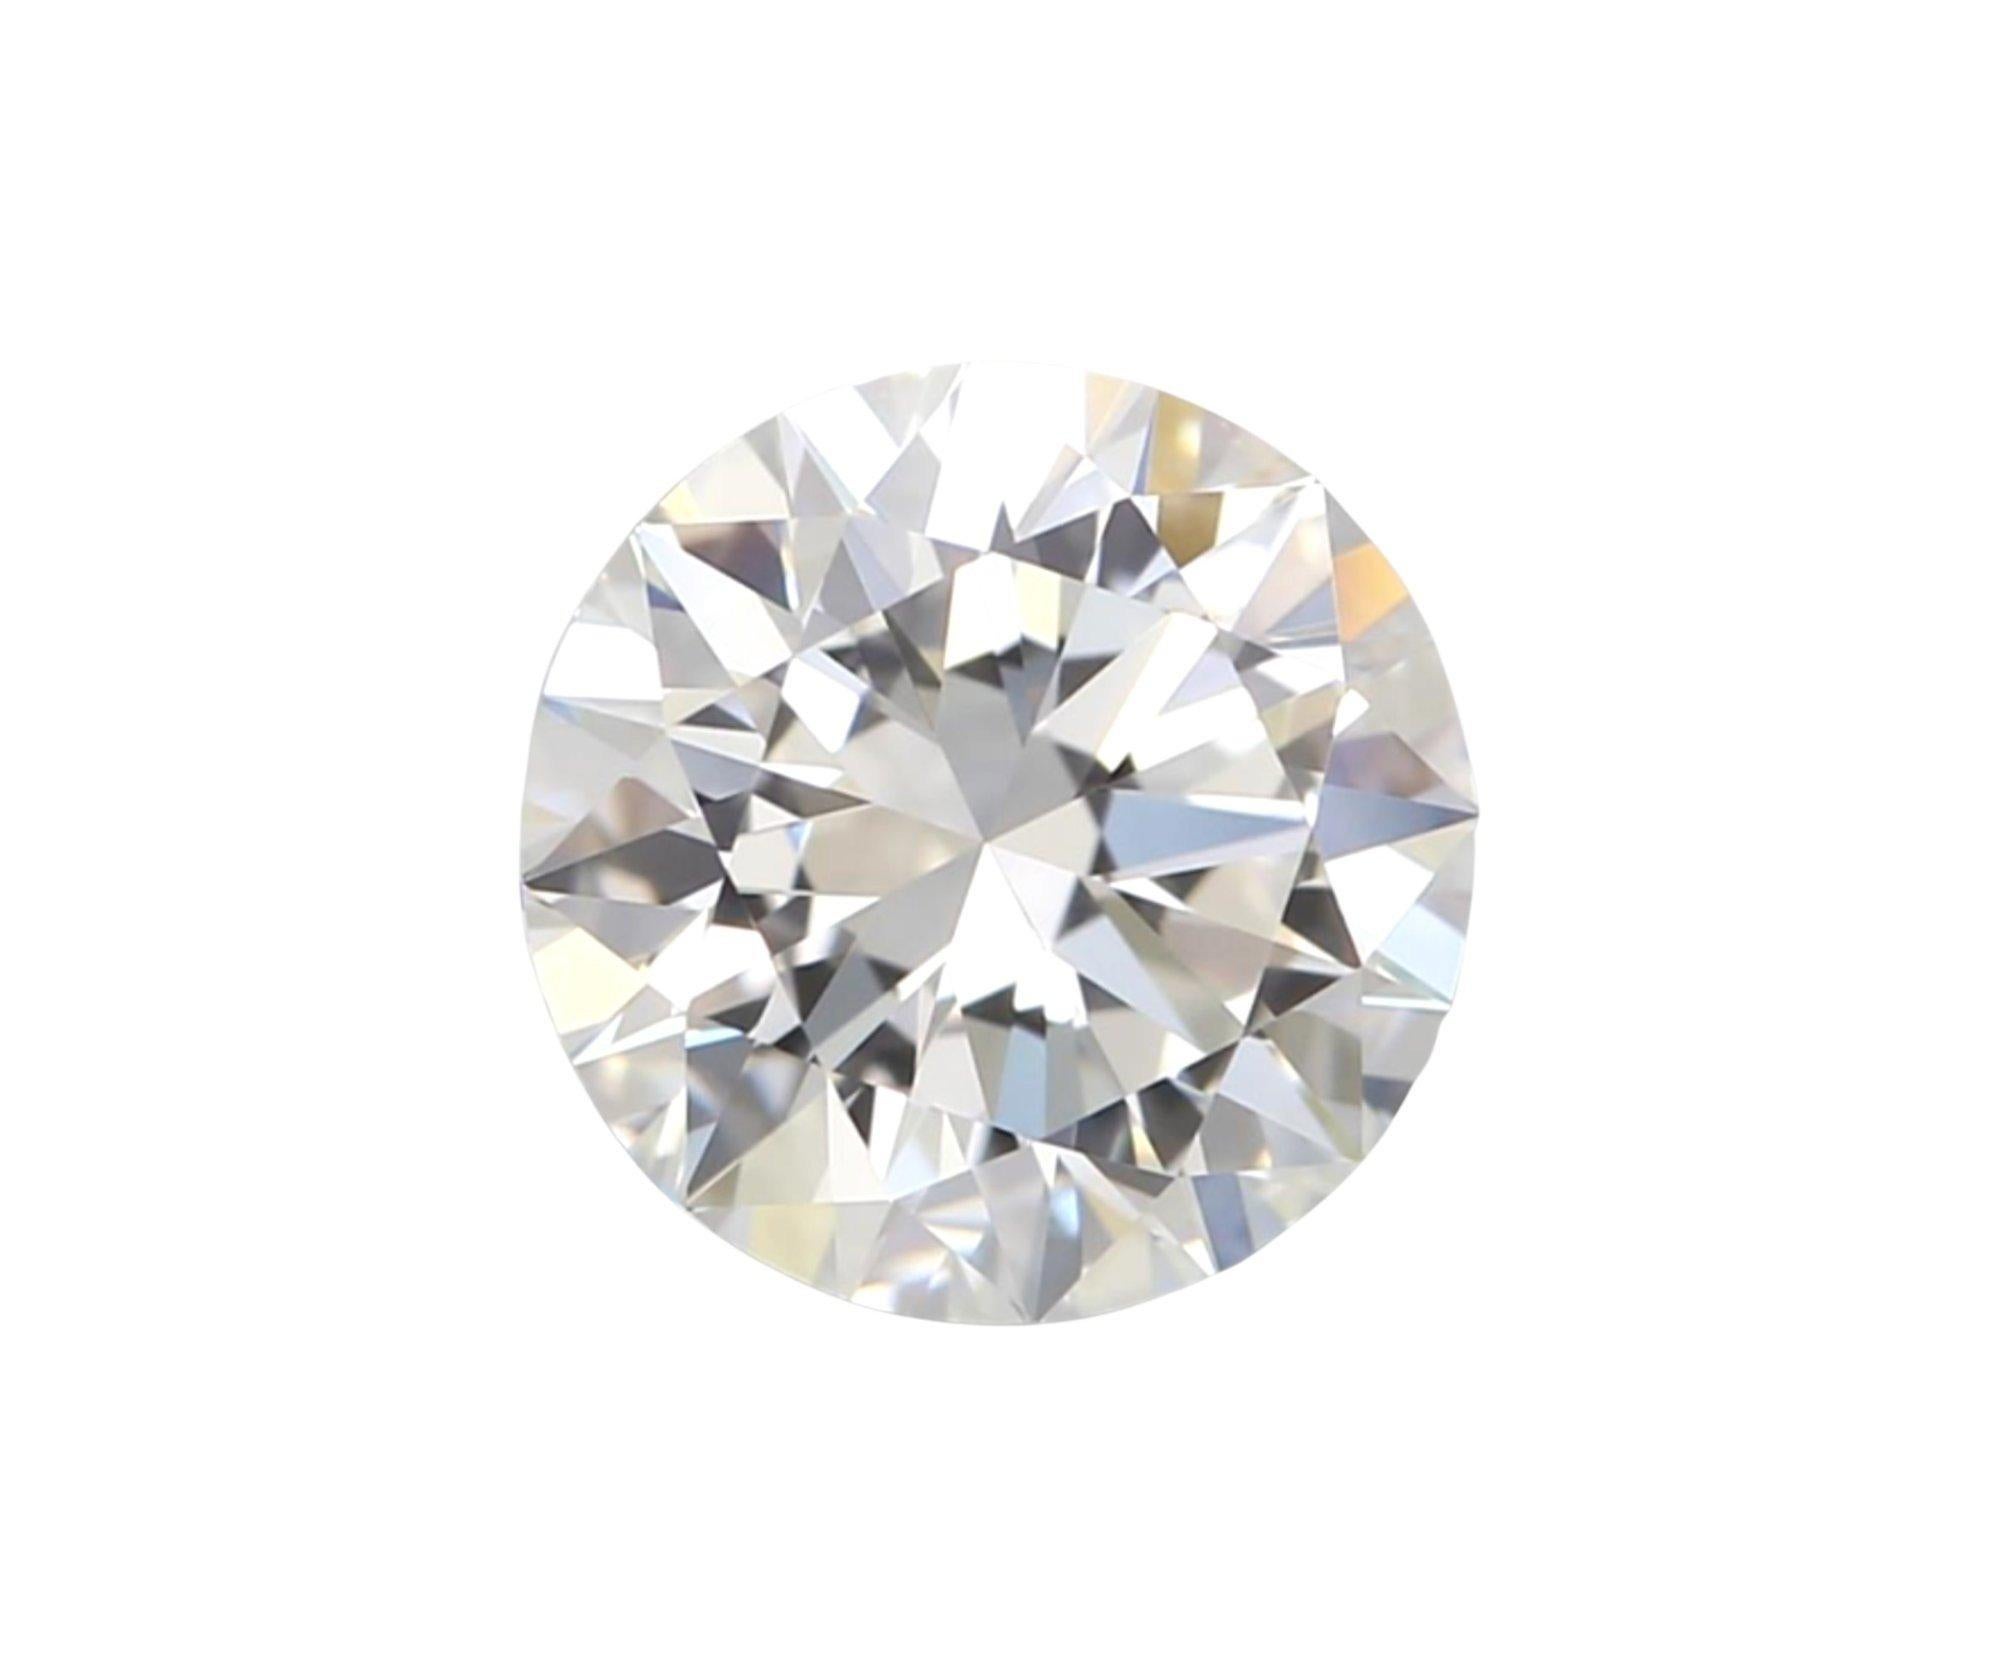 1 sparkling natural round brilliant cut diamond in a 0.92 carat H VVS1 with very good cut. This diamond comes with GIA Certificate and laser inscription number.

SKU: C-DSPV-167352-22
GIA 1445964114
